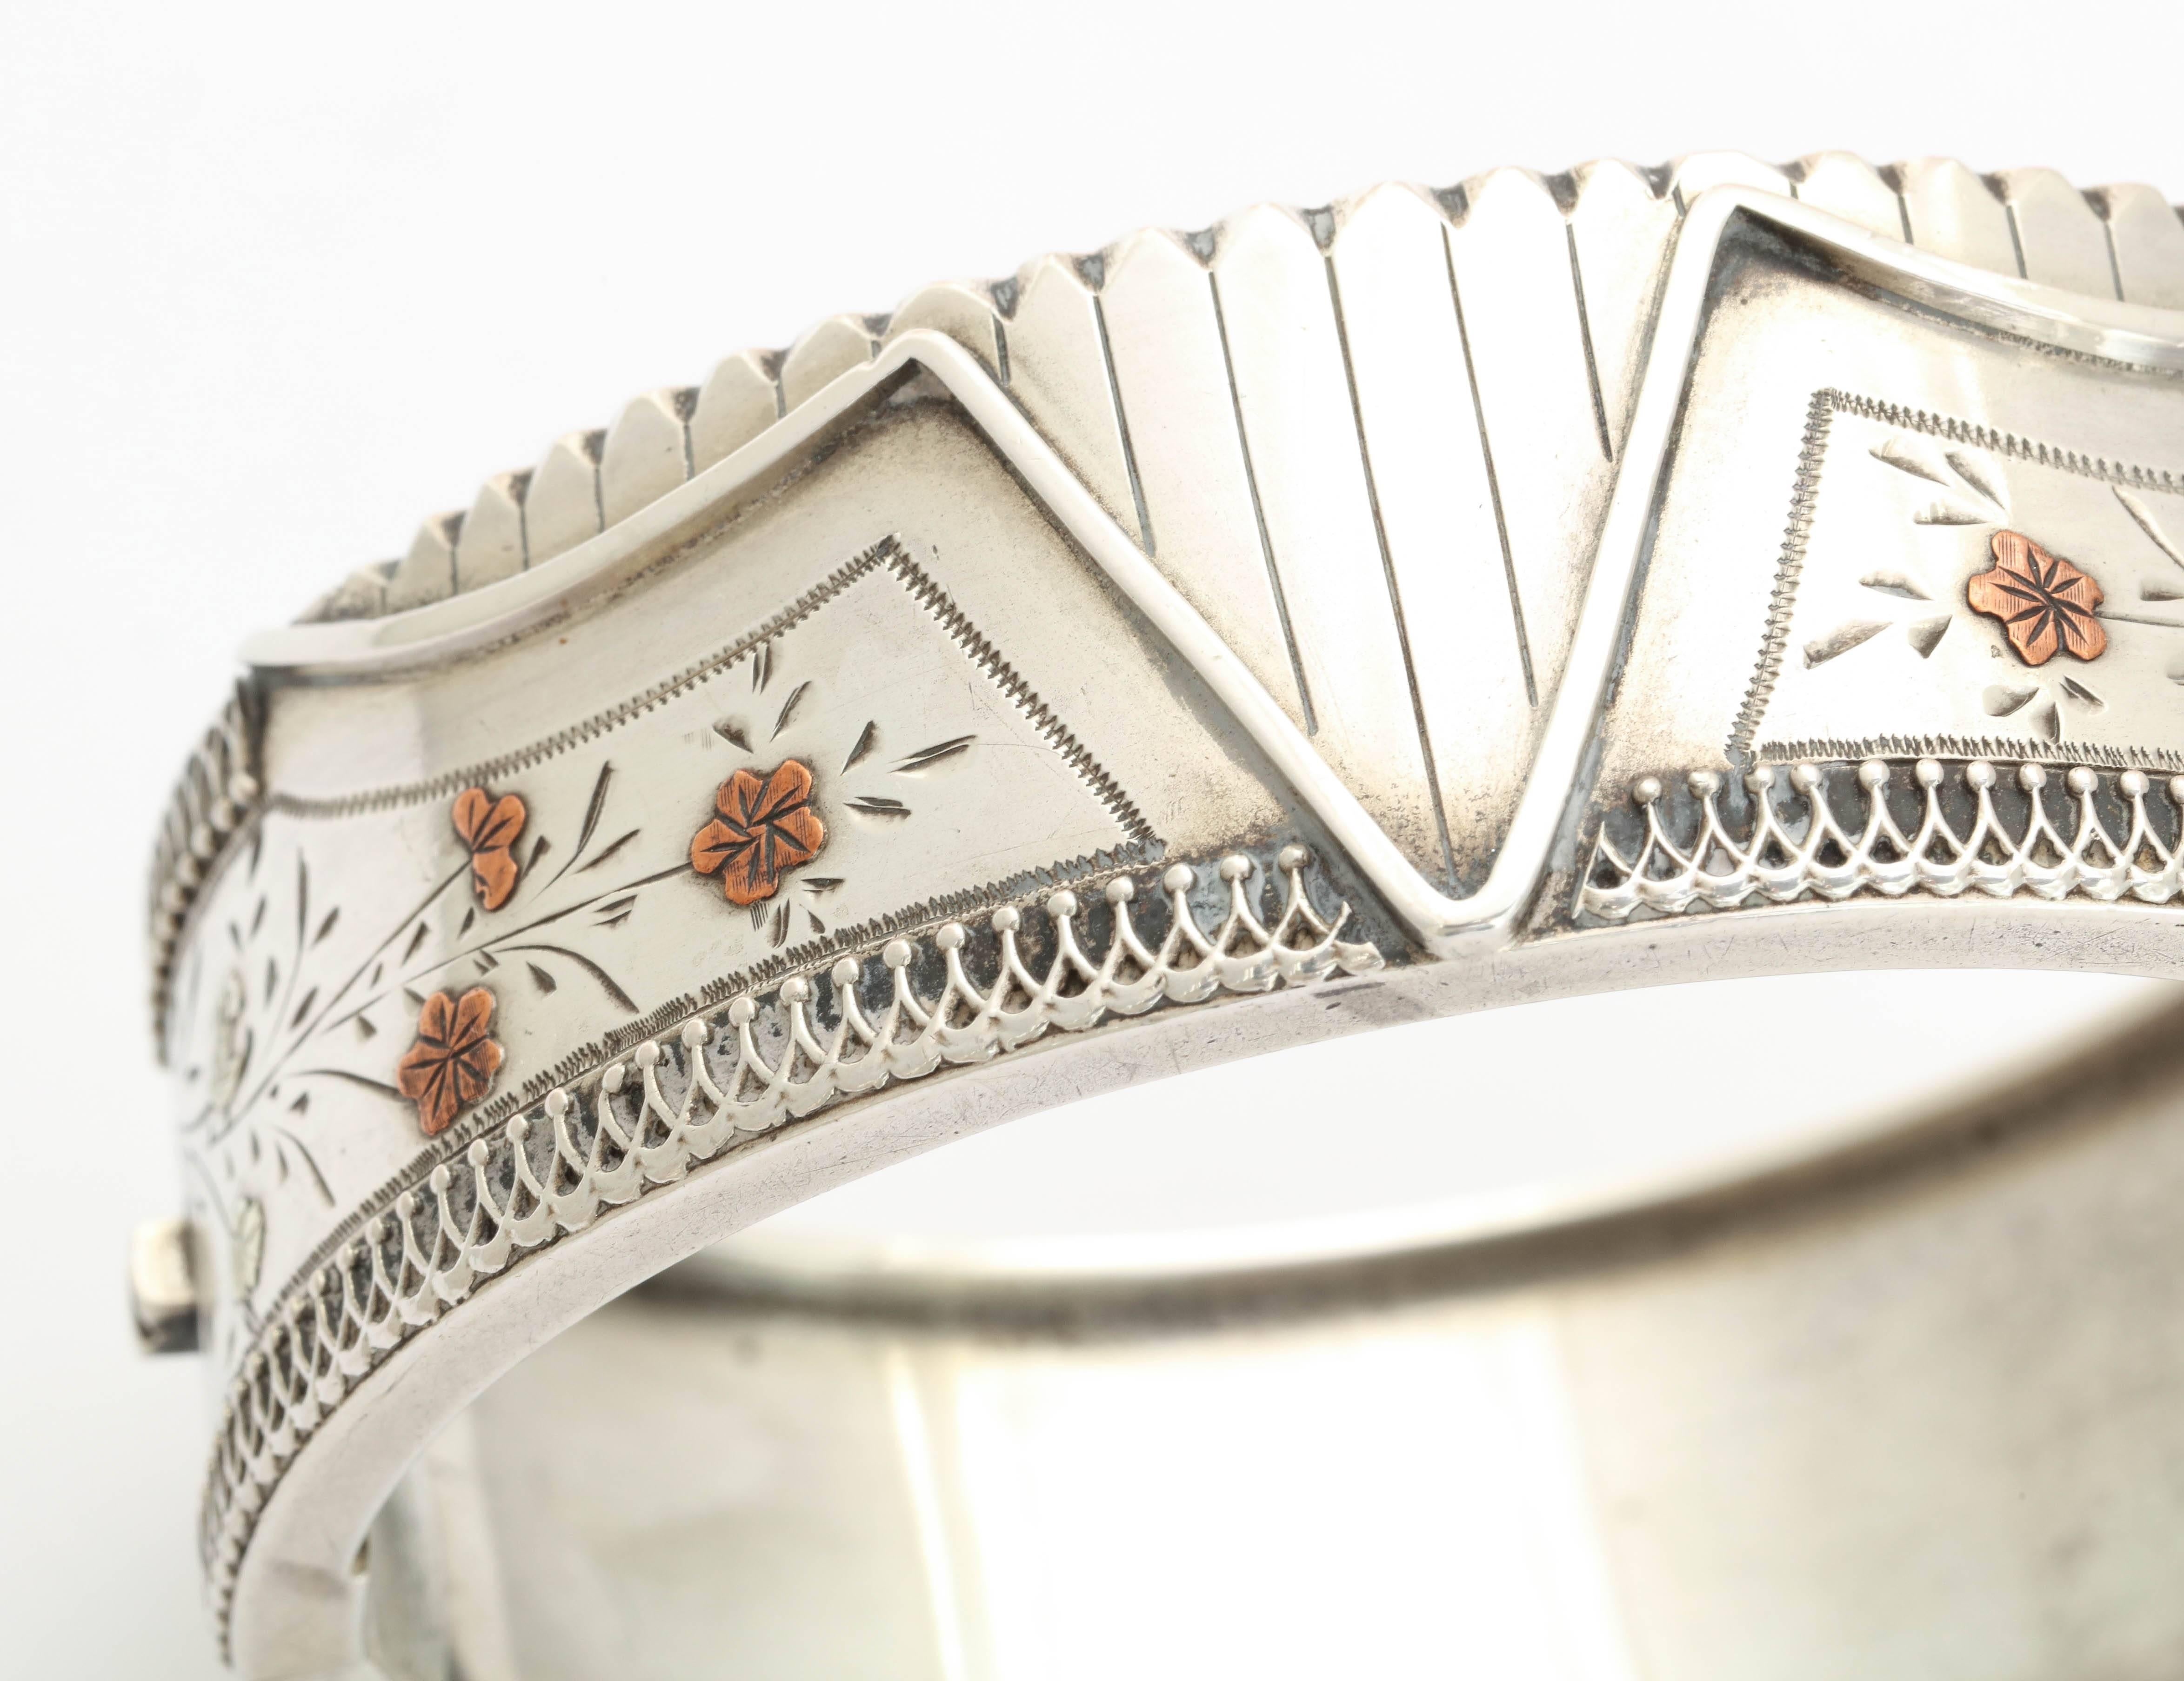 We admire he geometric detail of this Silver Victorian Cuff, and the wonderful engraving of gold washed spring flowers. The designs of Victorian silver are extremely varied. This bracelet hints at the risqué image of a partially undone corset.